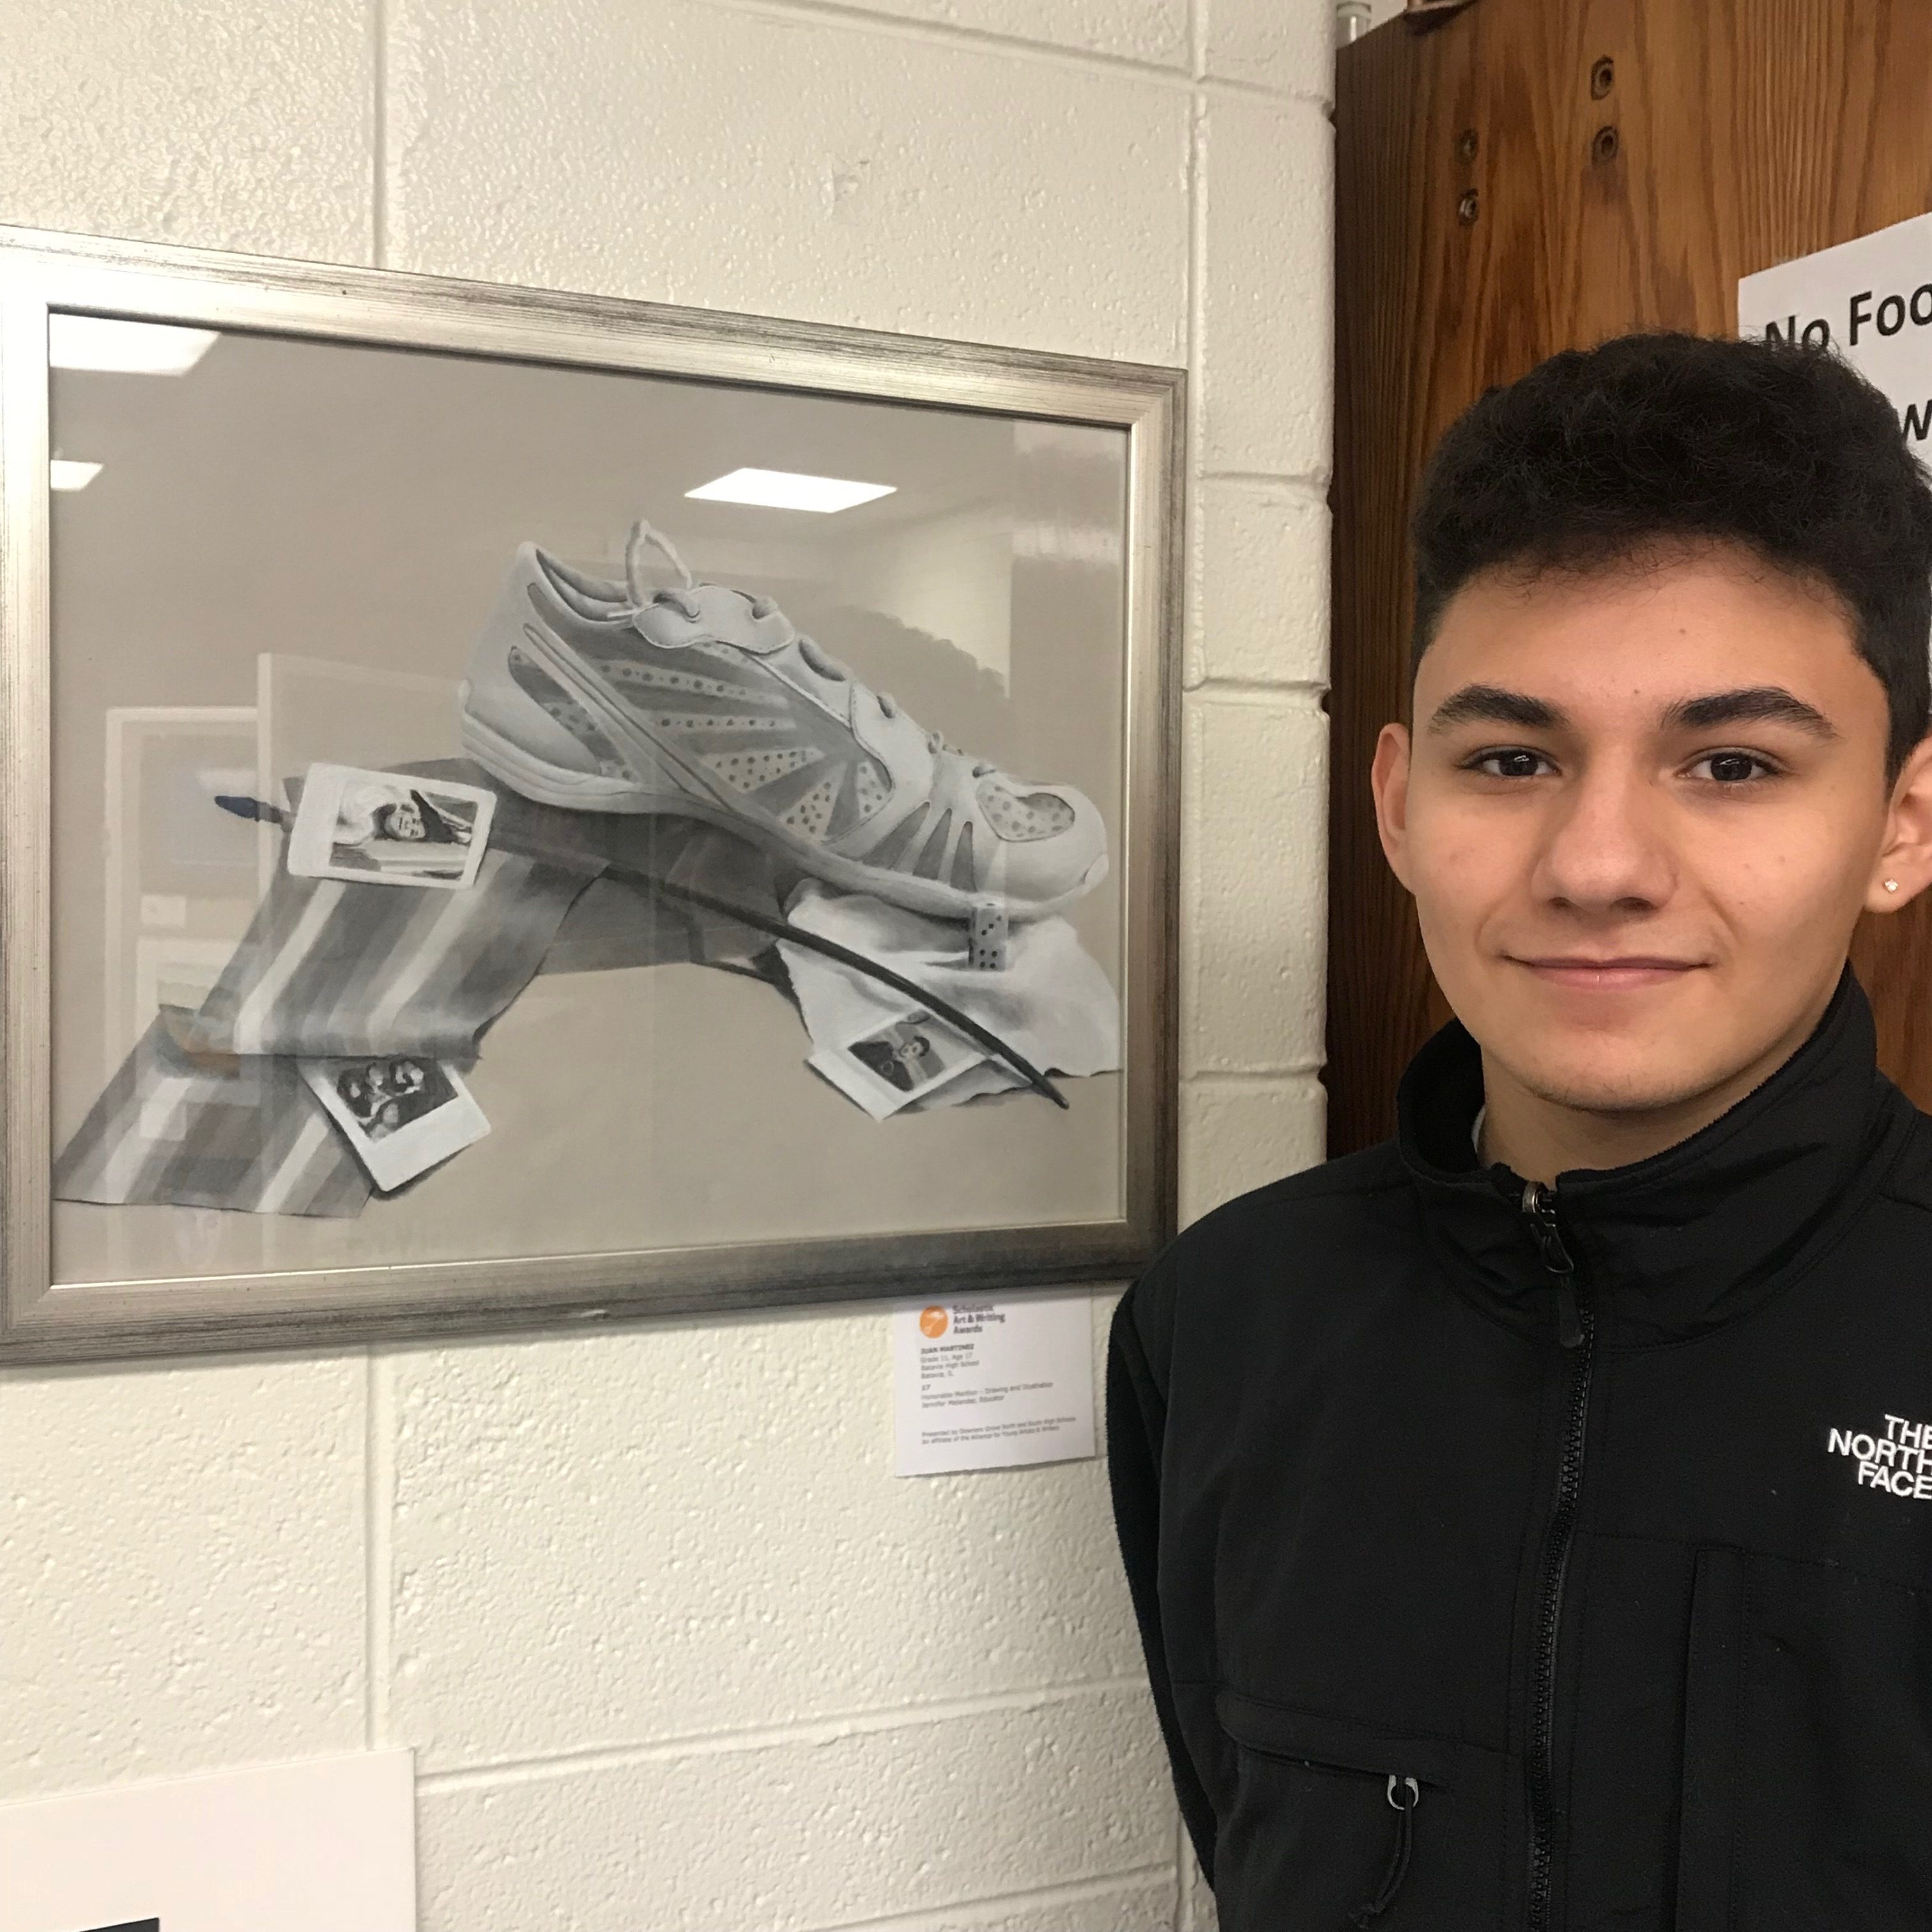 NAHS student drawing a future for themselves